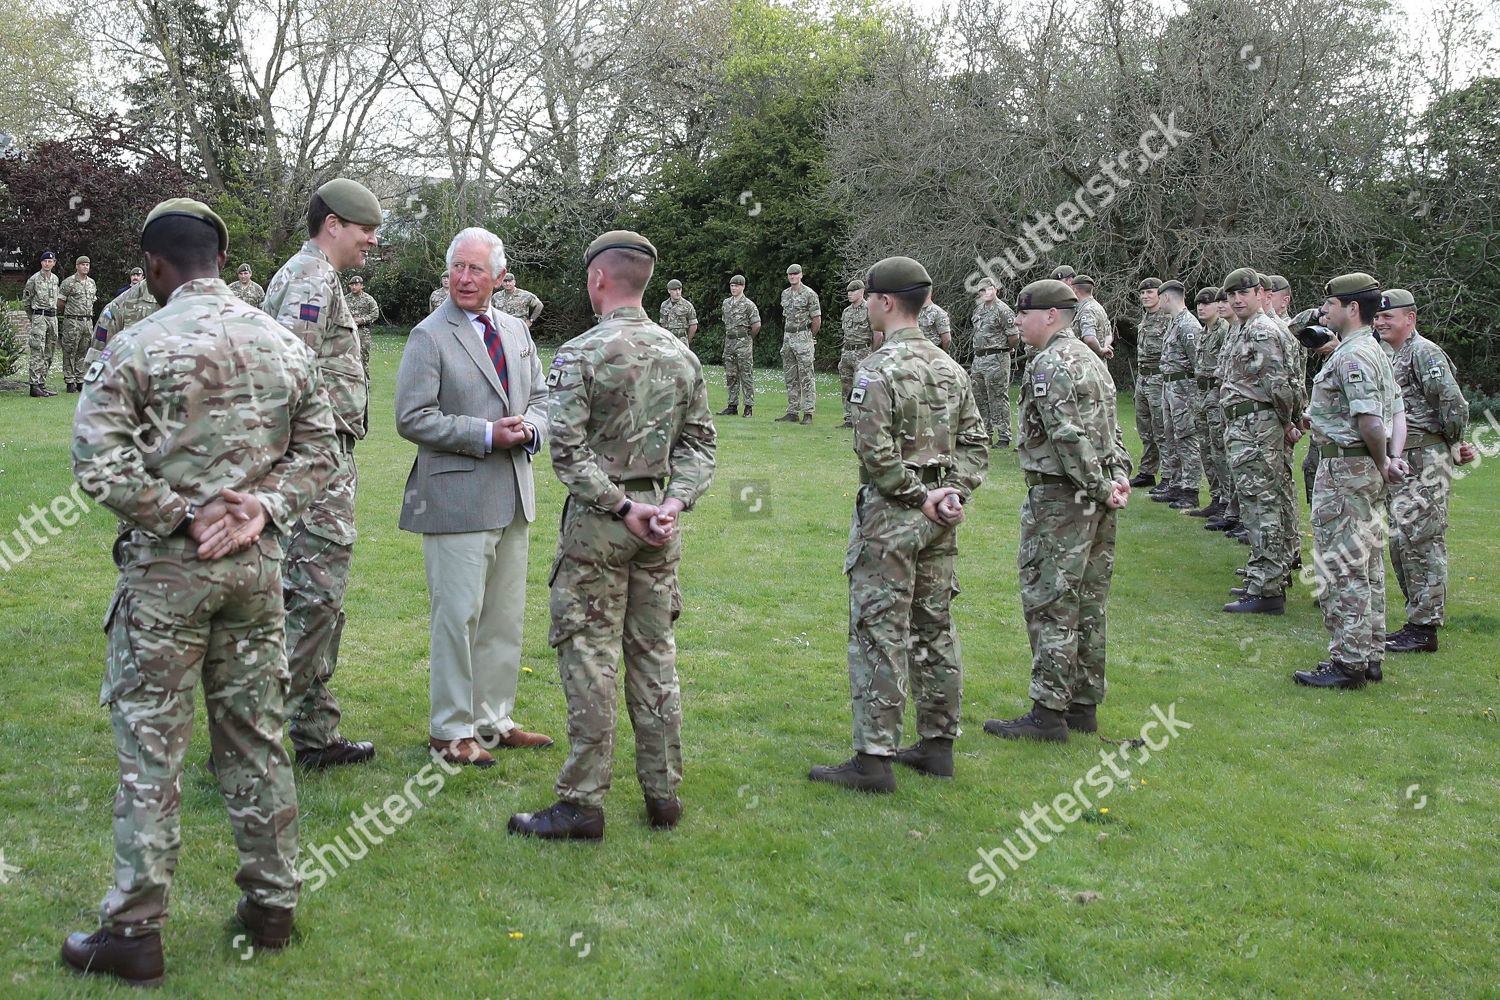 prince-charles-visits-members-of-the-welsh-guards-windsor-uk-shutterstock-editorial-11889775t.jpg